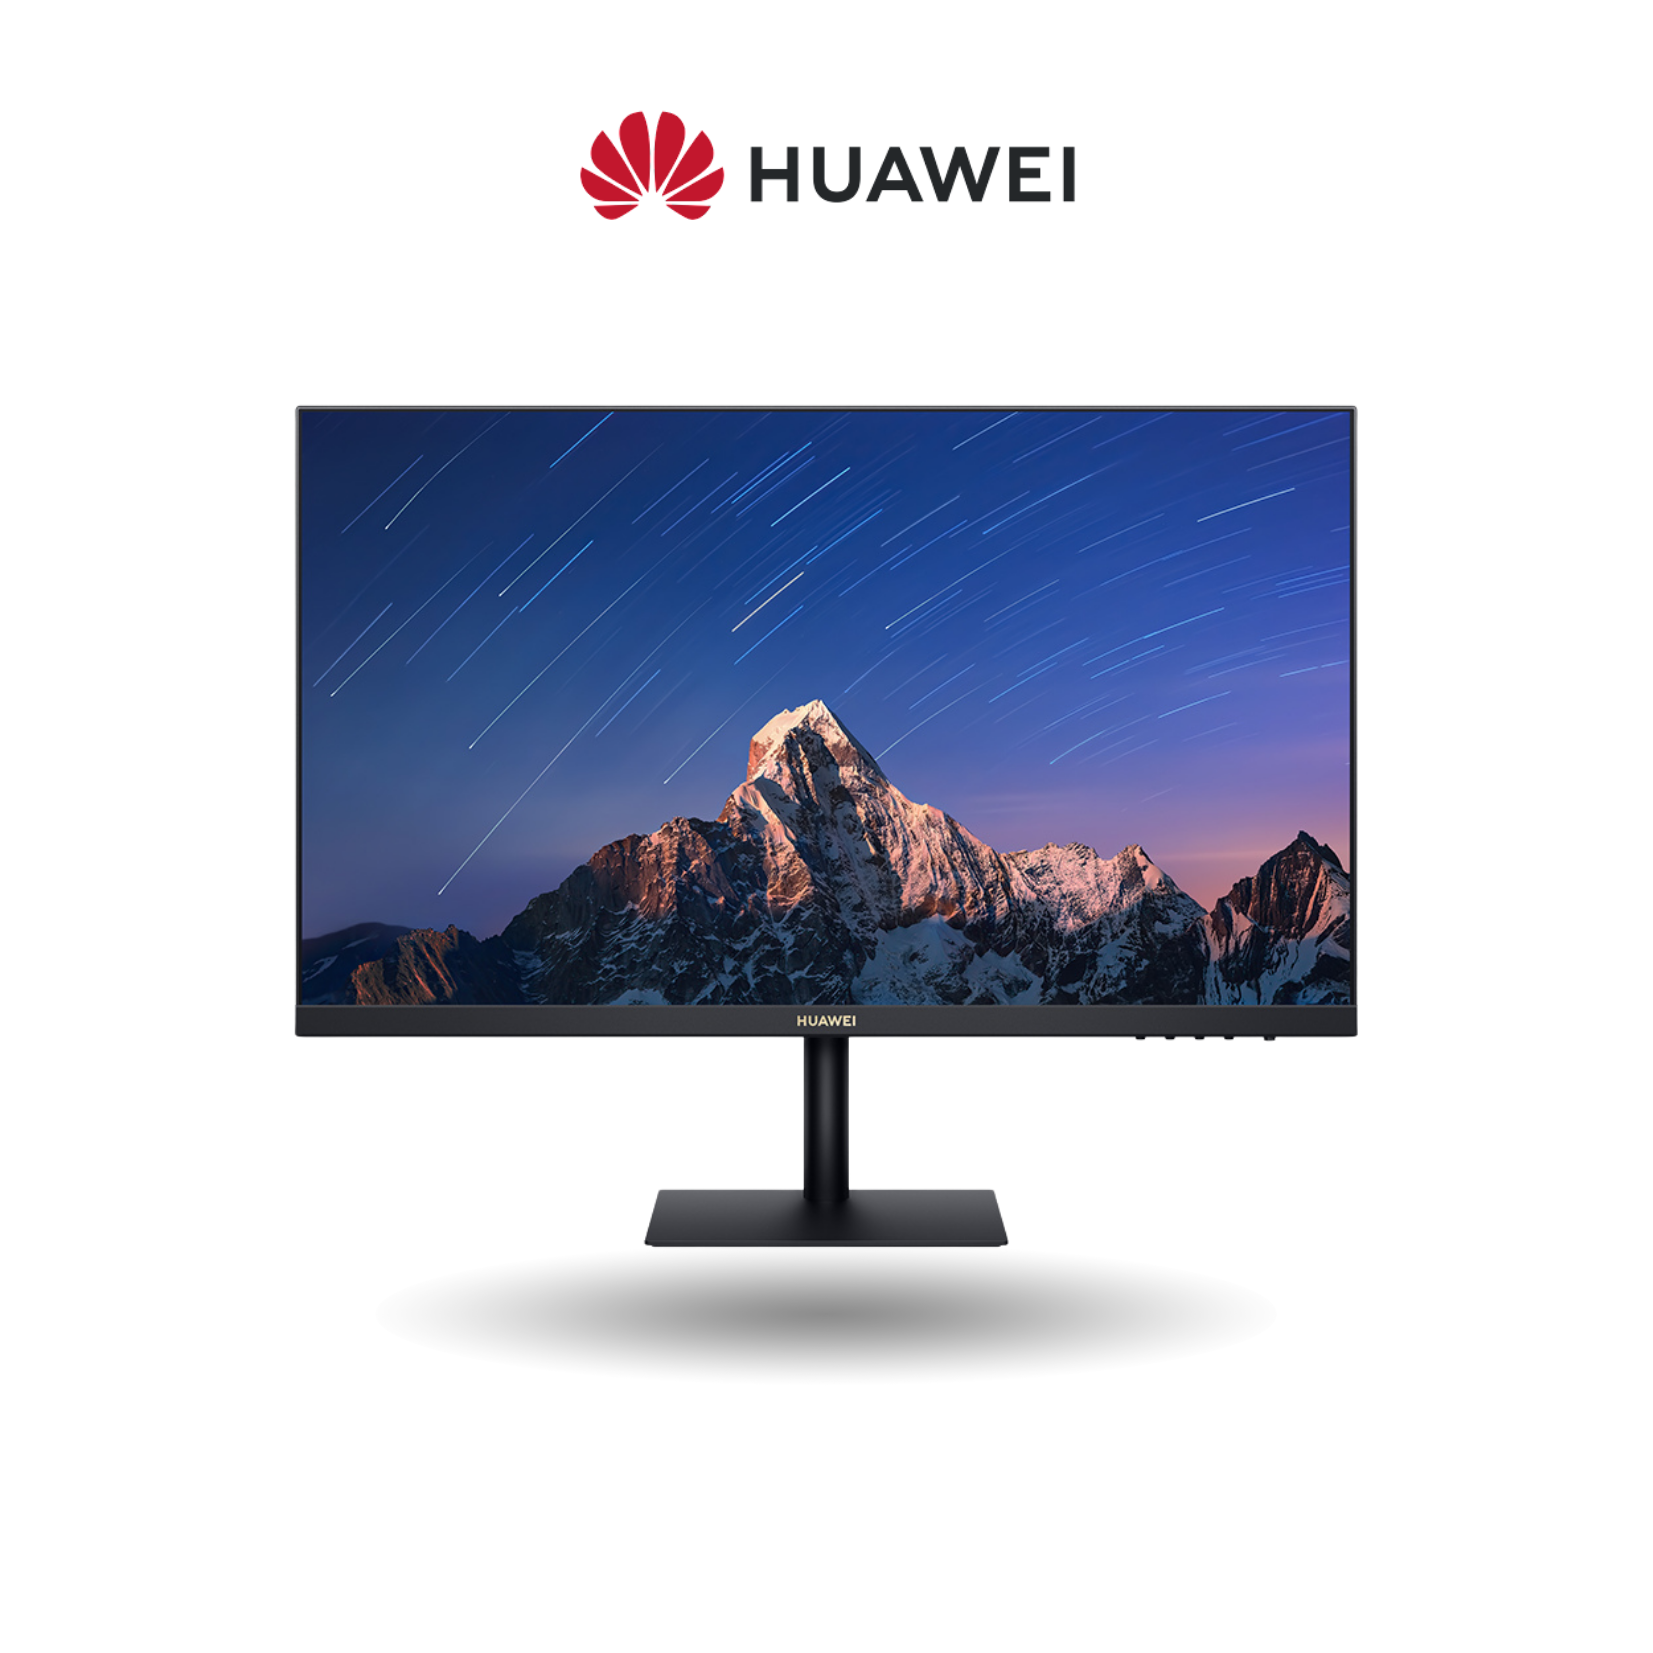 Huawei Display 23.8 AD80 - 23.8" FullView Display | Low Blue Light | Just Adjust And Unwind